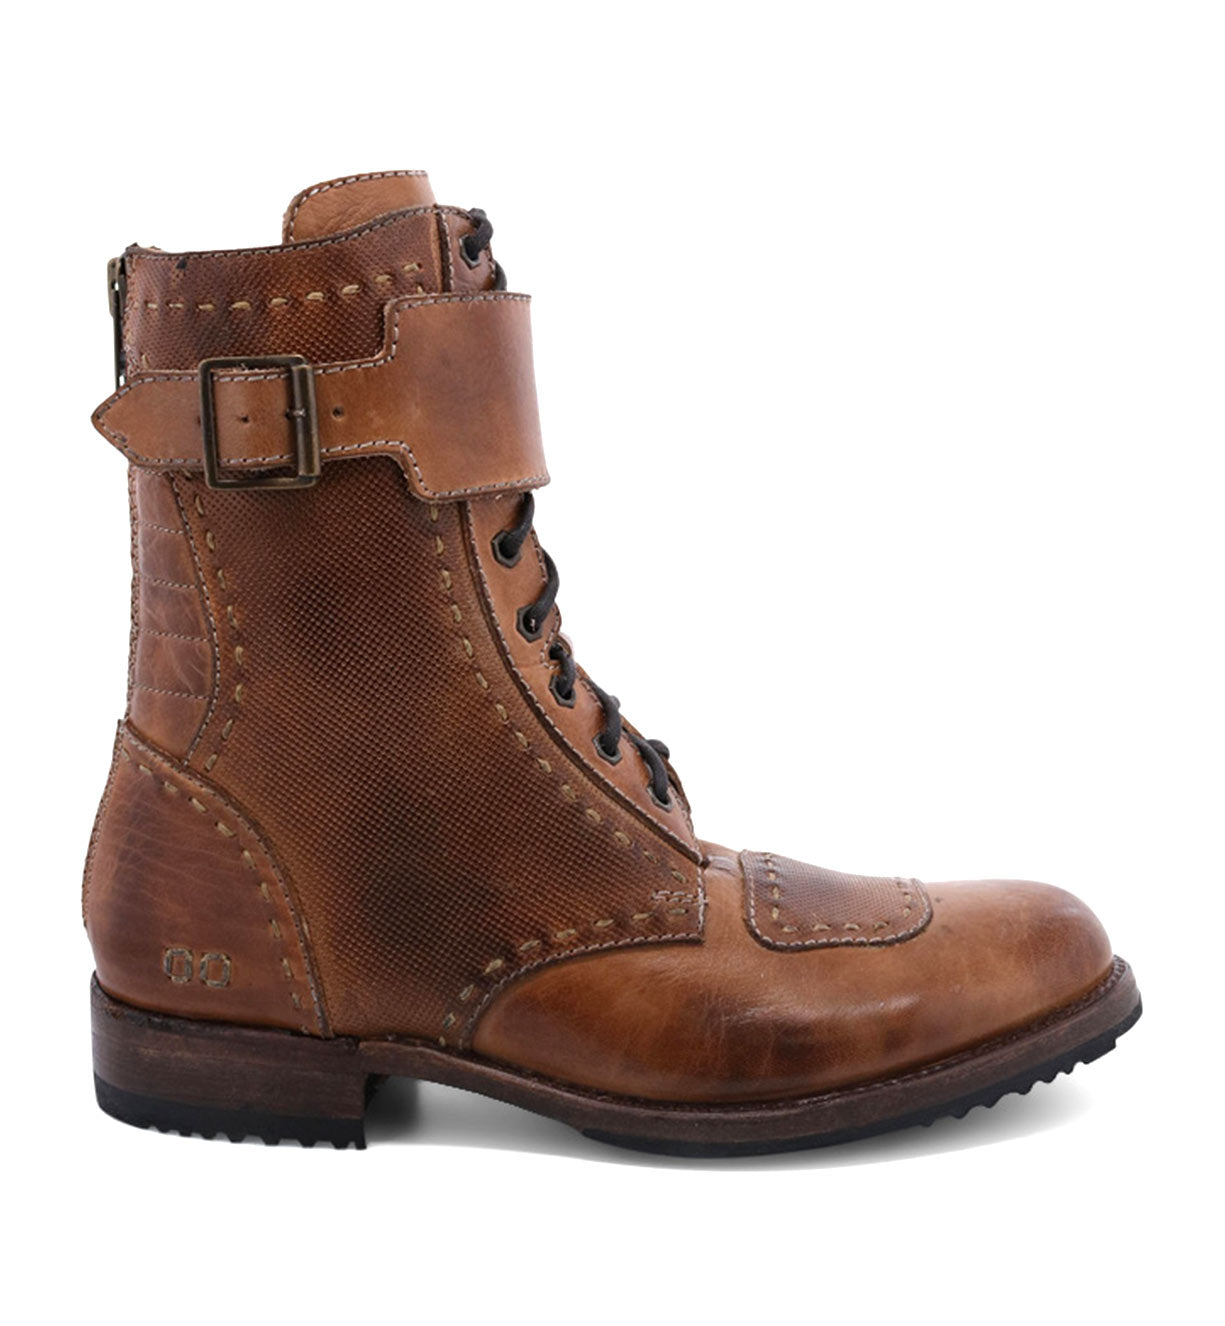 Bed Stu's Walker Tan Rustic Mason BFS Boot, a moto-inspired brown leather lace-up boot with strap and buckle detail, isolated on a white background.